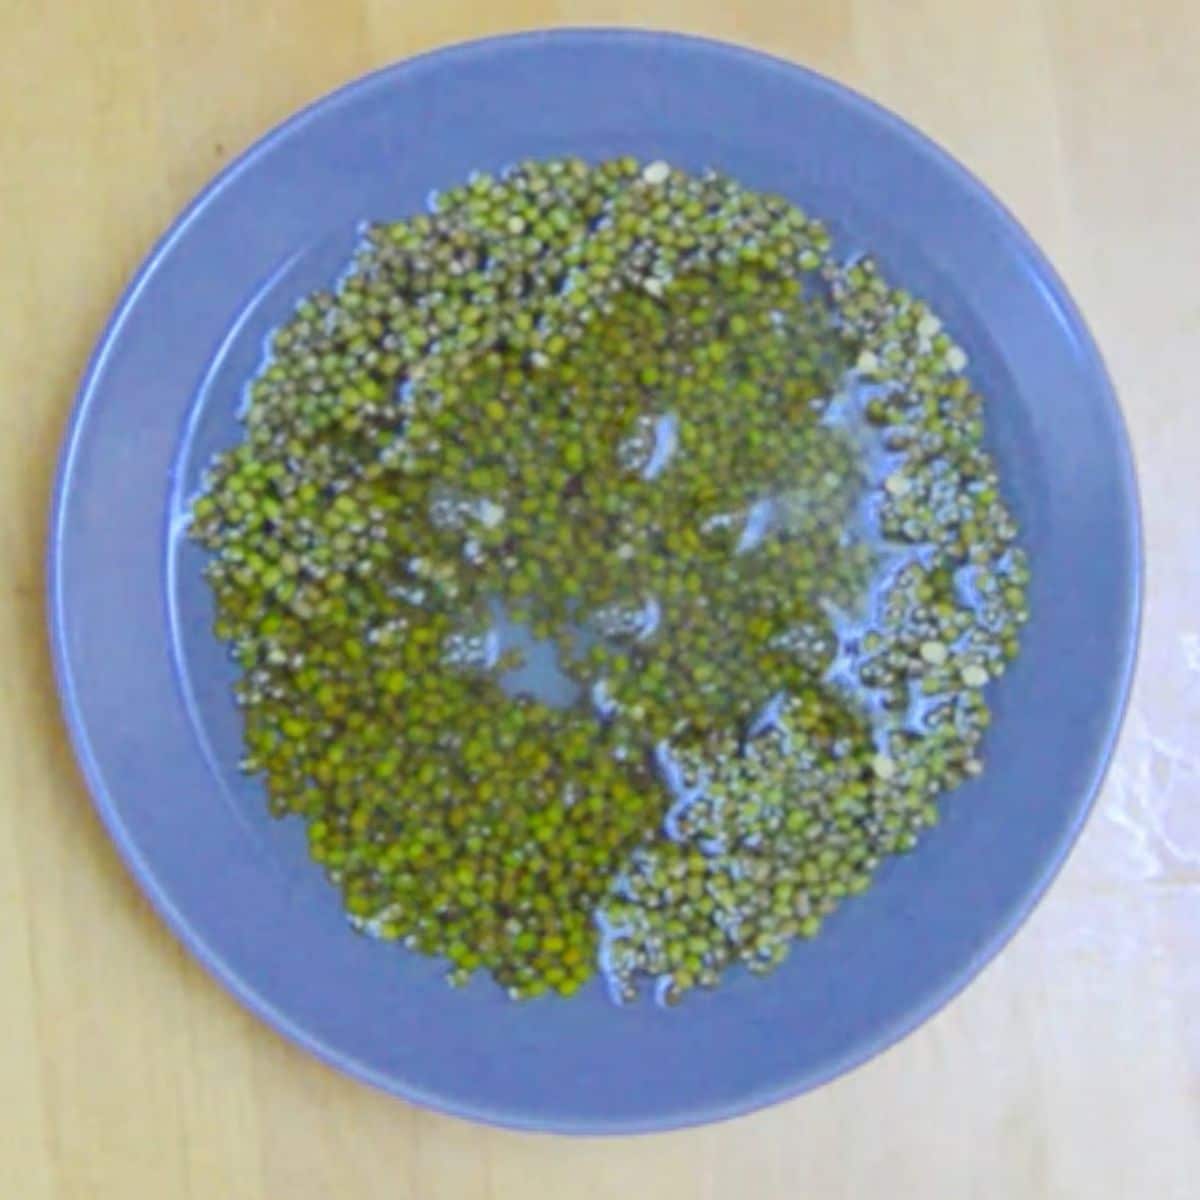 soaked whole green moong dal in a grey bowl.